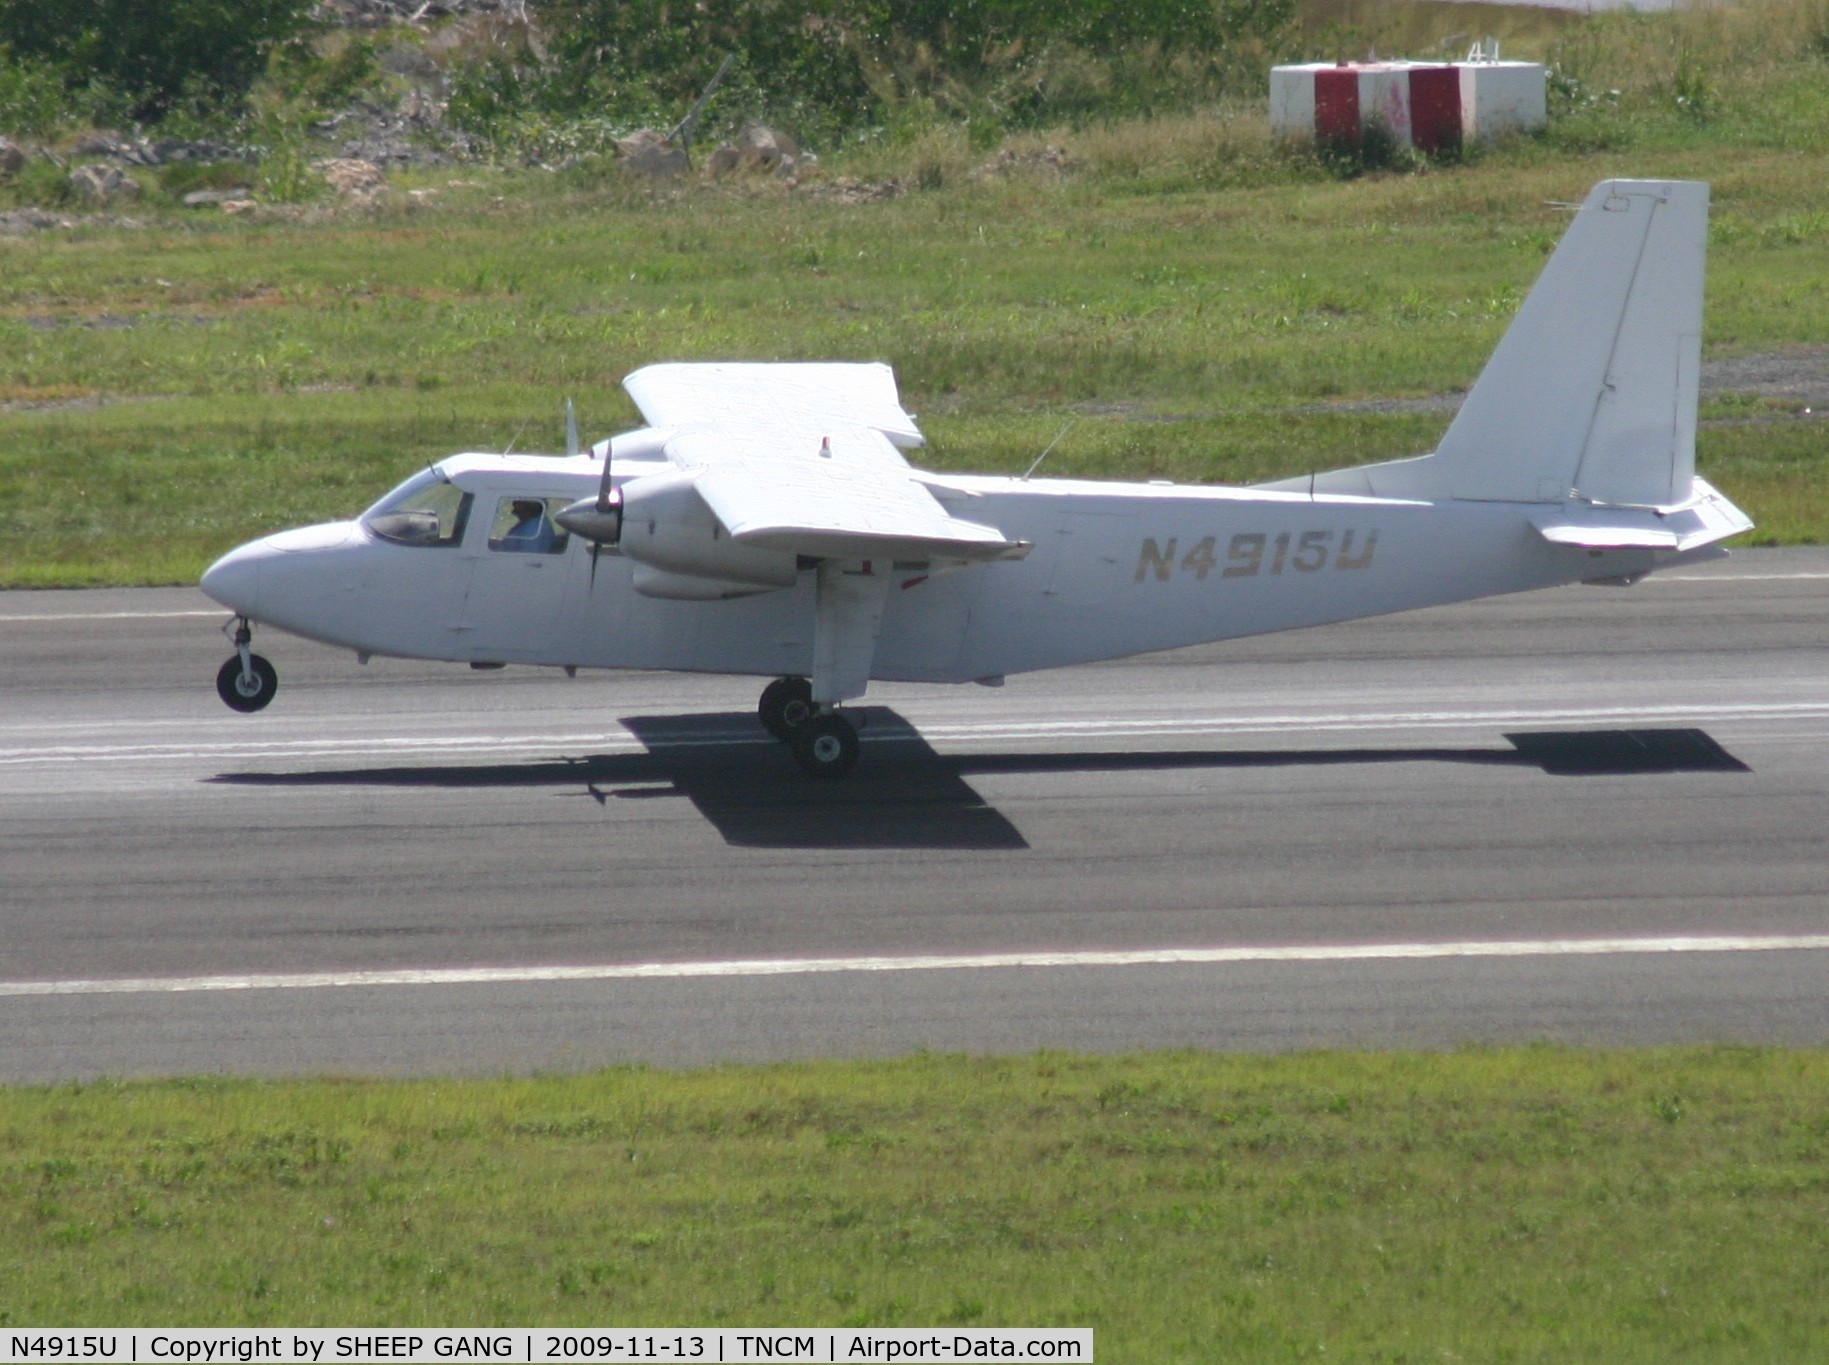 N4915U, 1976 Britten-Norman BN-2A-27 Islander C/N 789, Came to pick up cargo for st barths